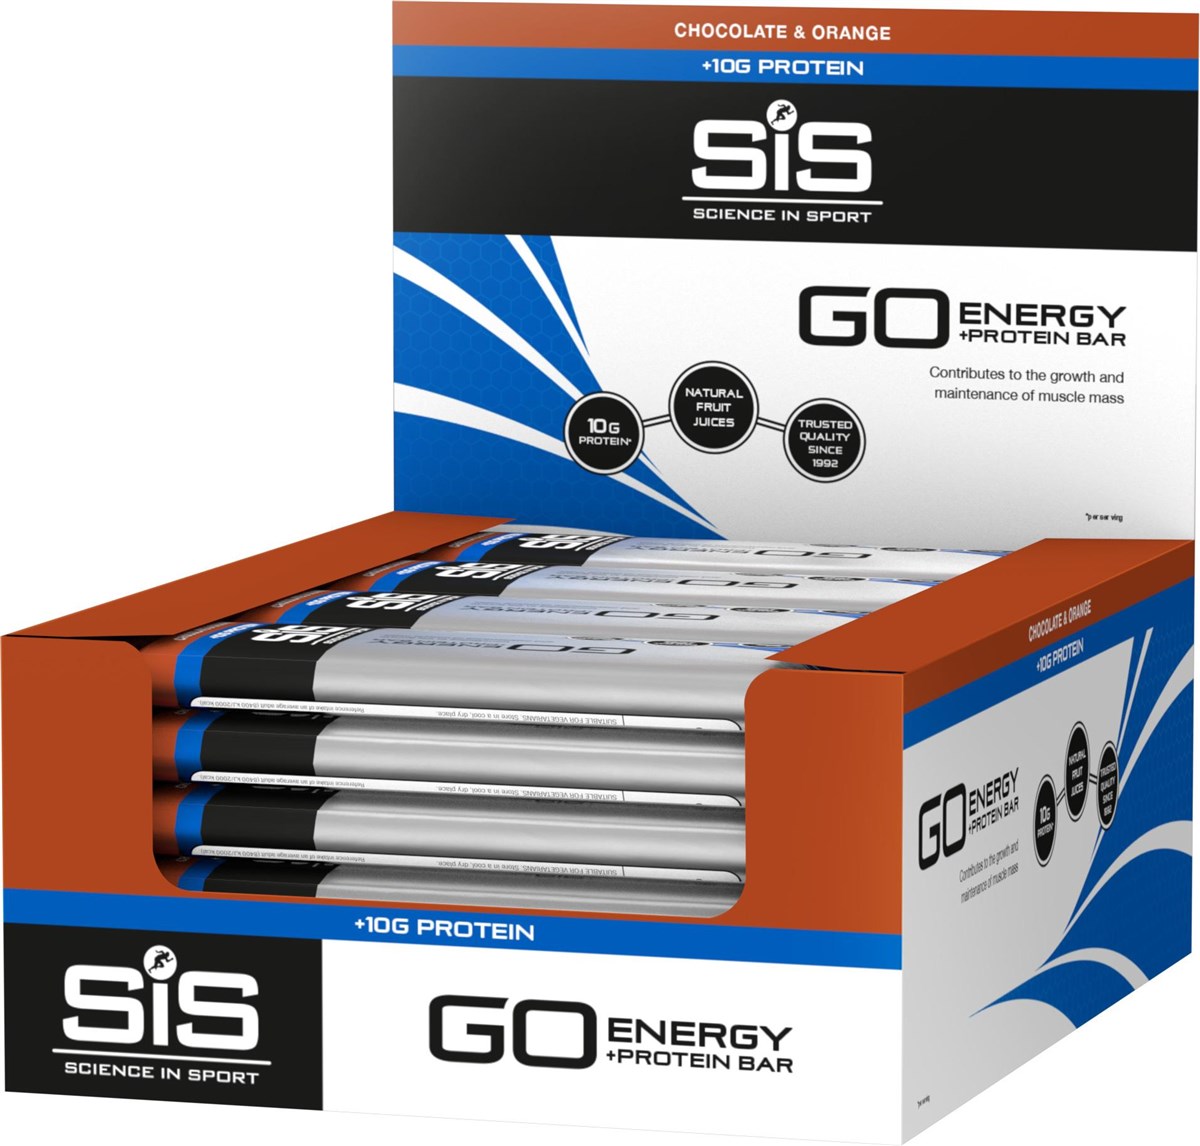 SiS GO Energy Bar Plus Protein 60g product image